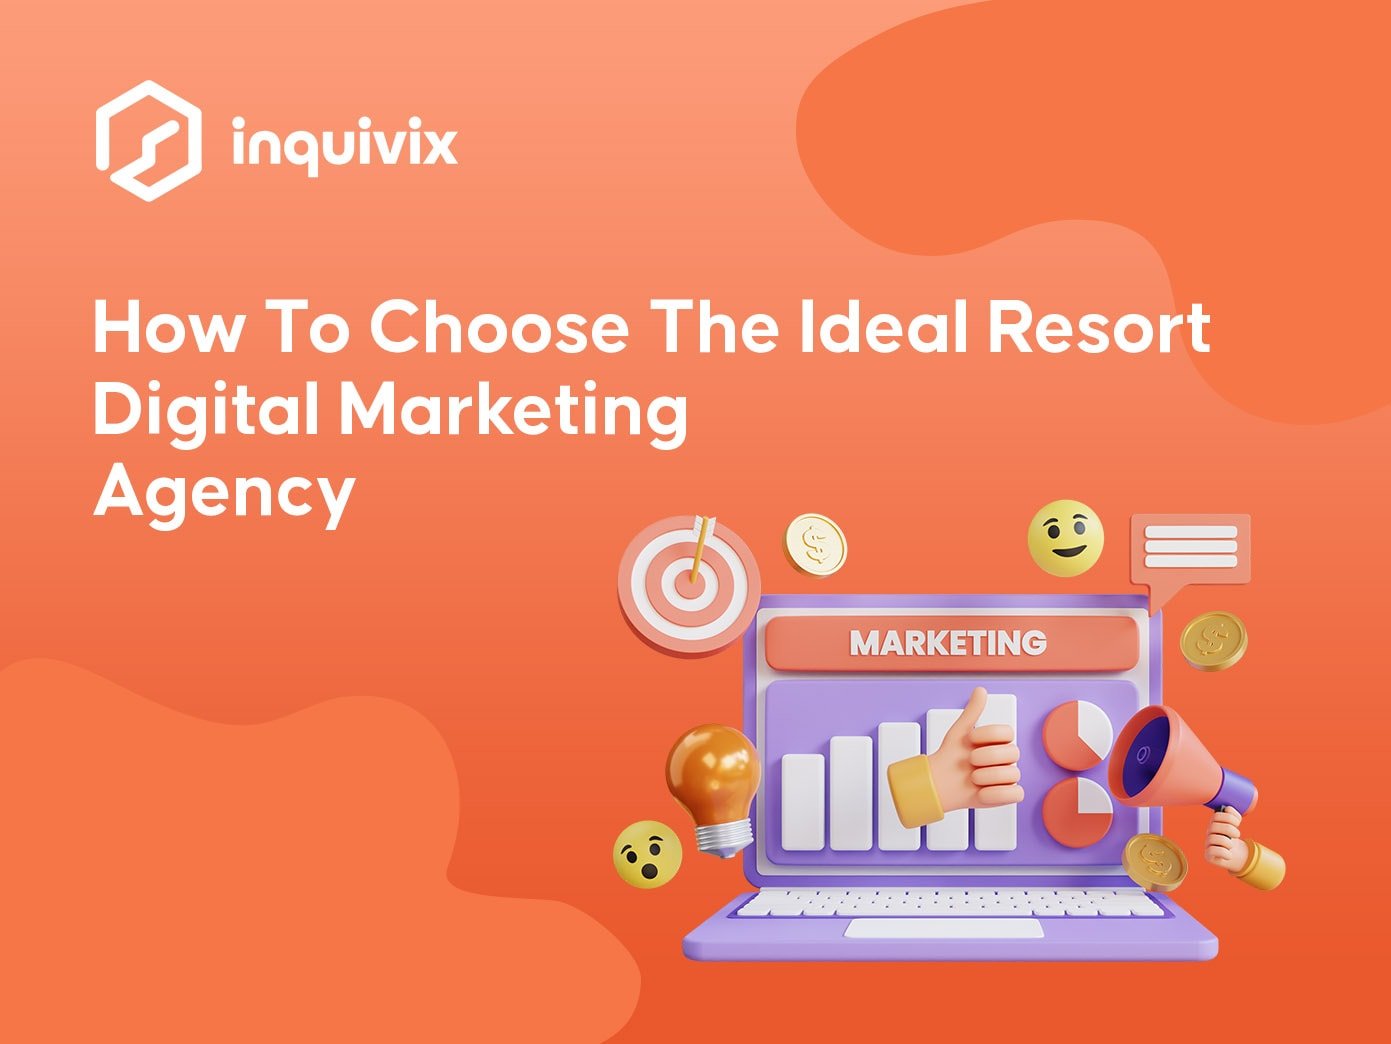 How To Choose The Ideal Resort Digital Marketing Agency | INQUIVIX